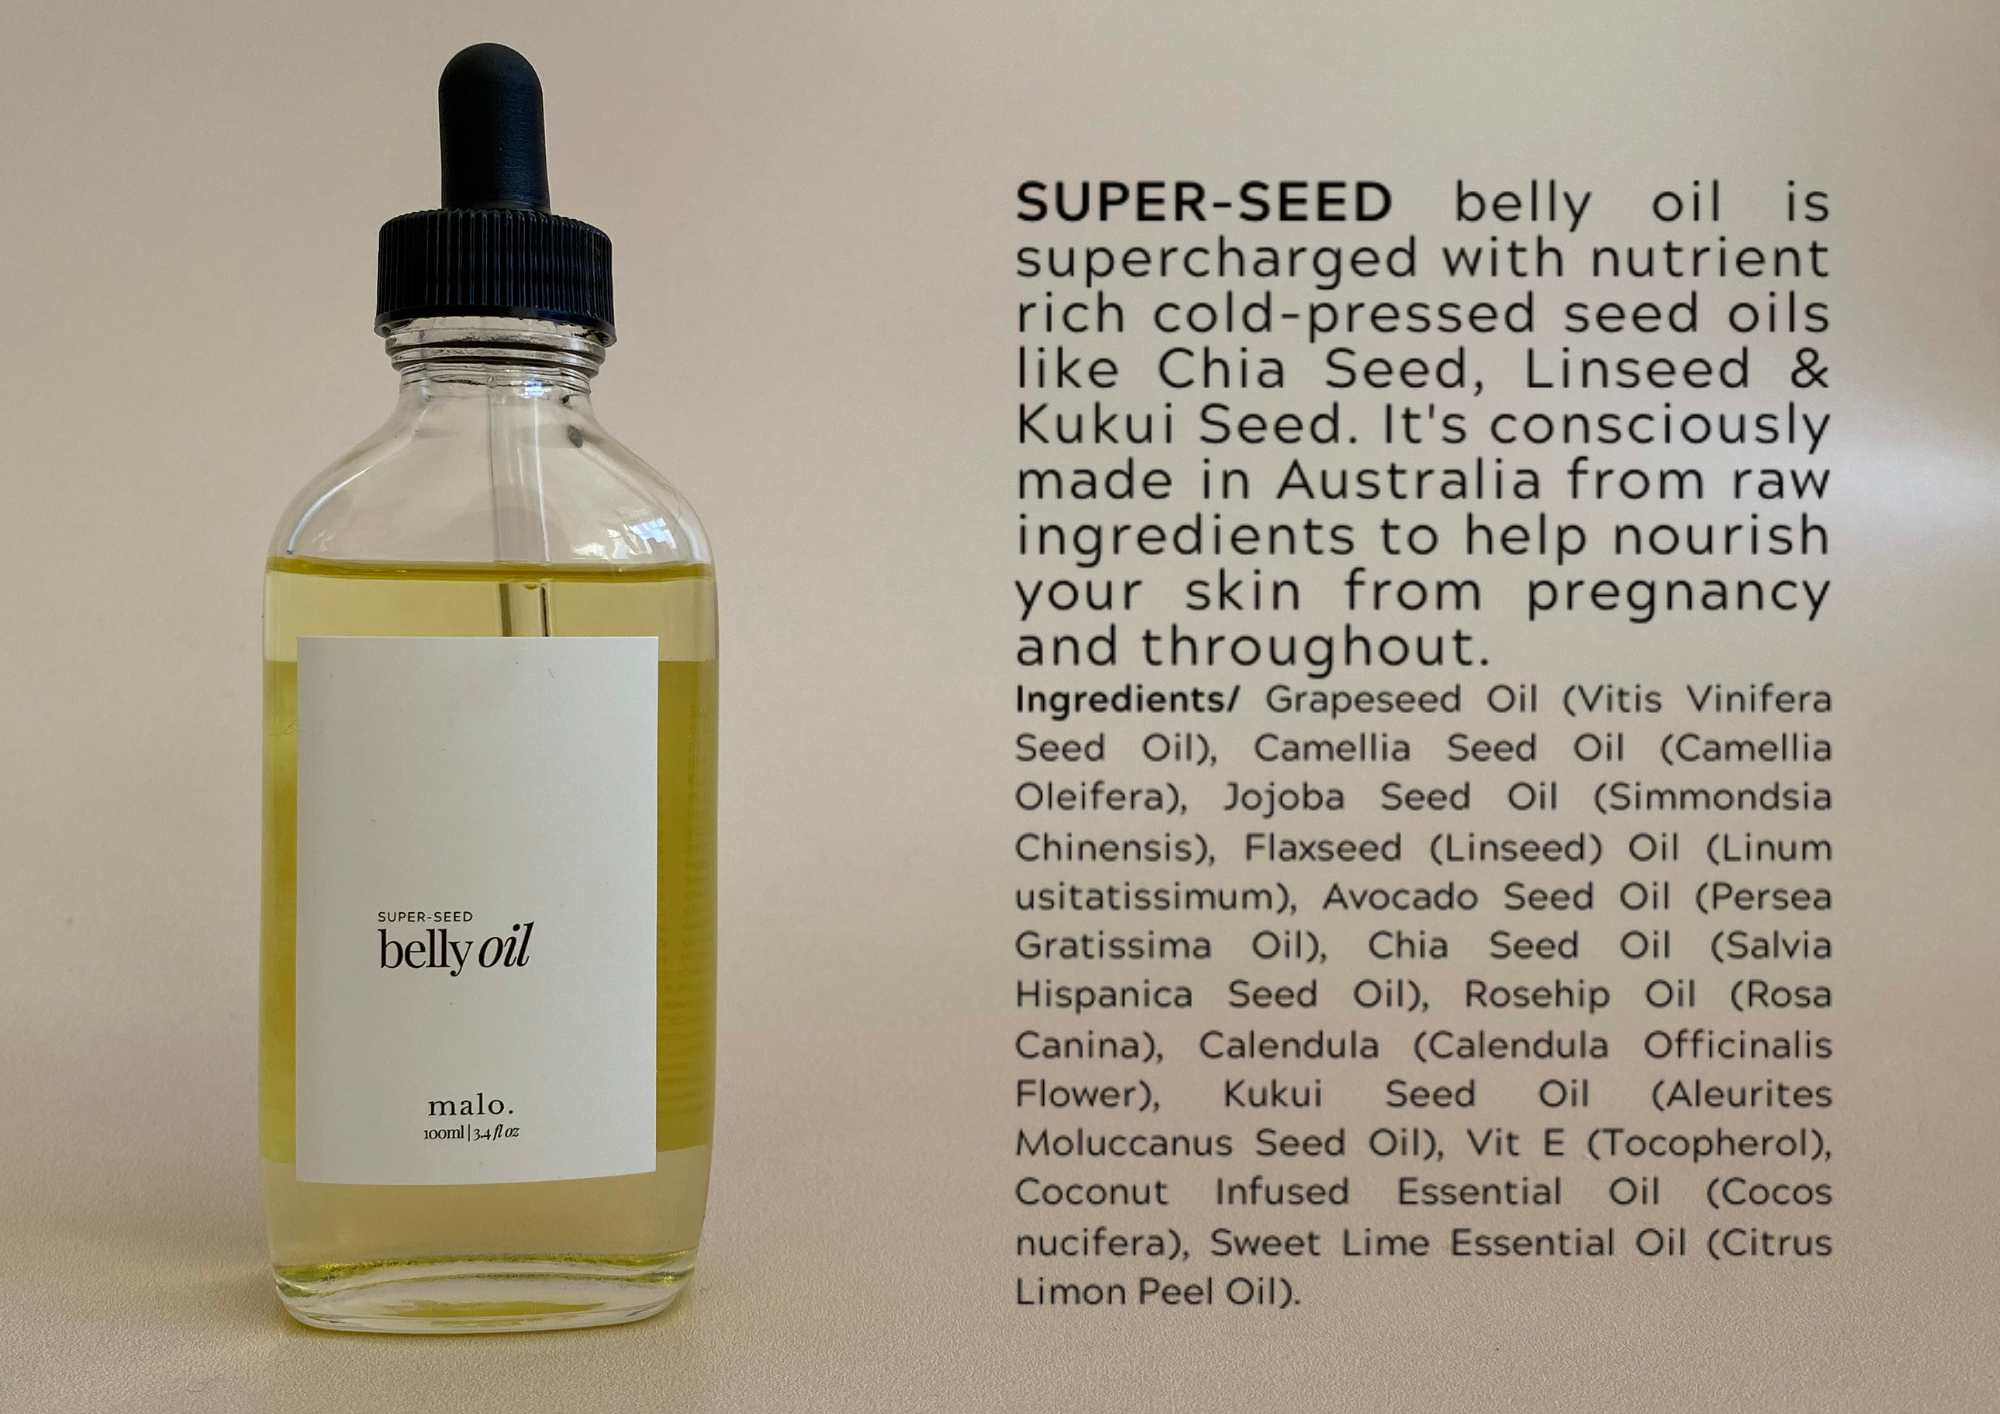 Super seed belly oil